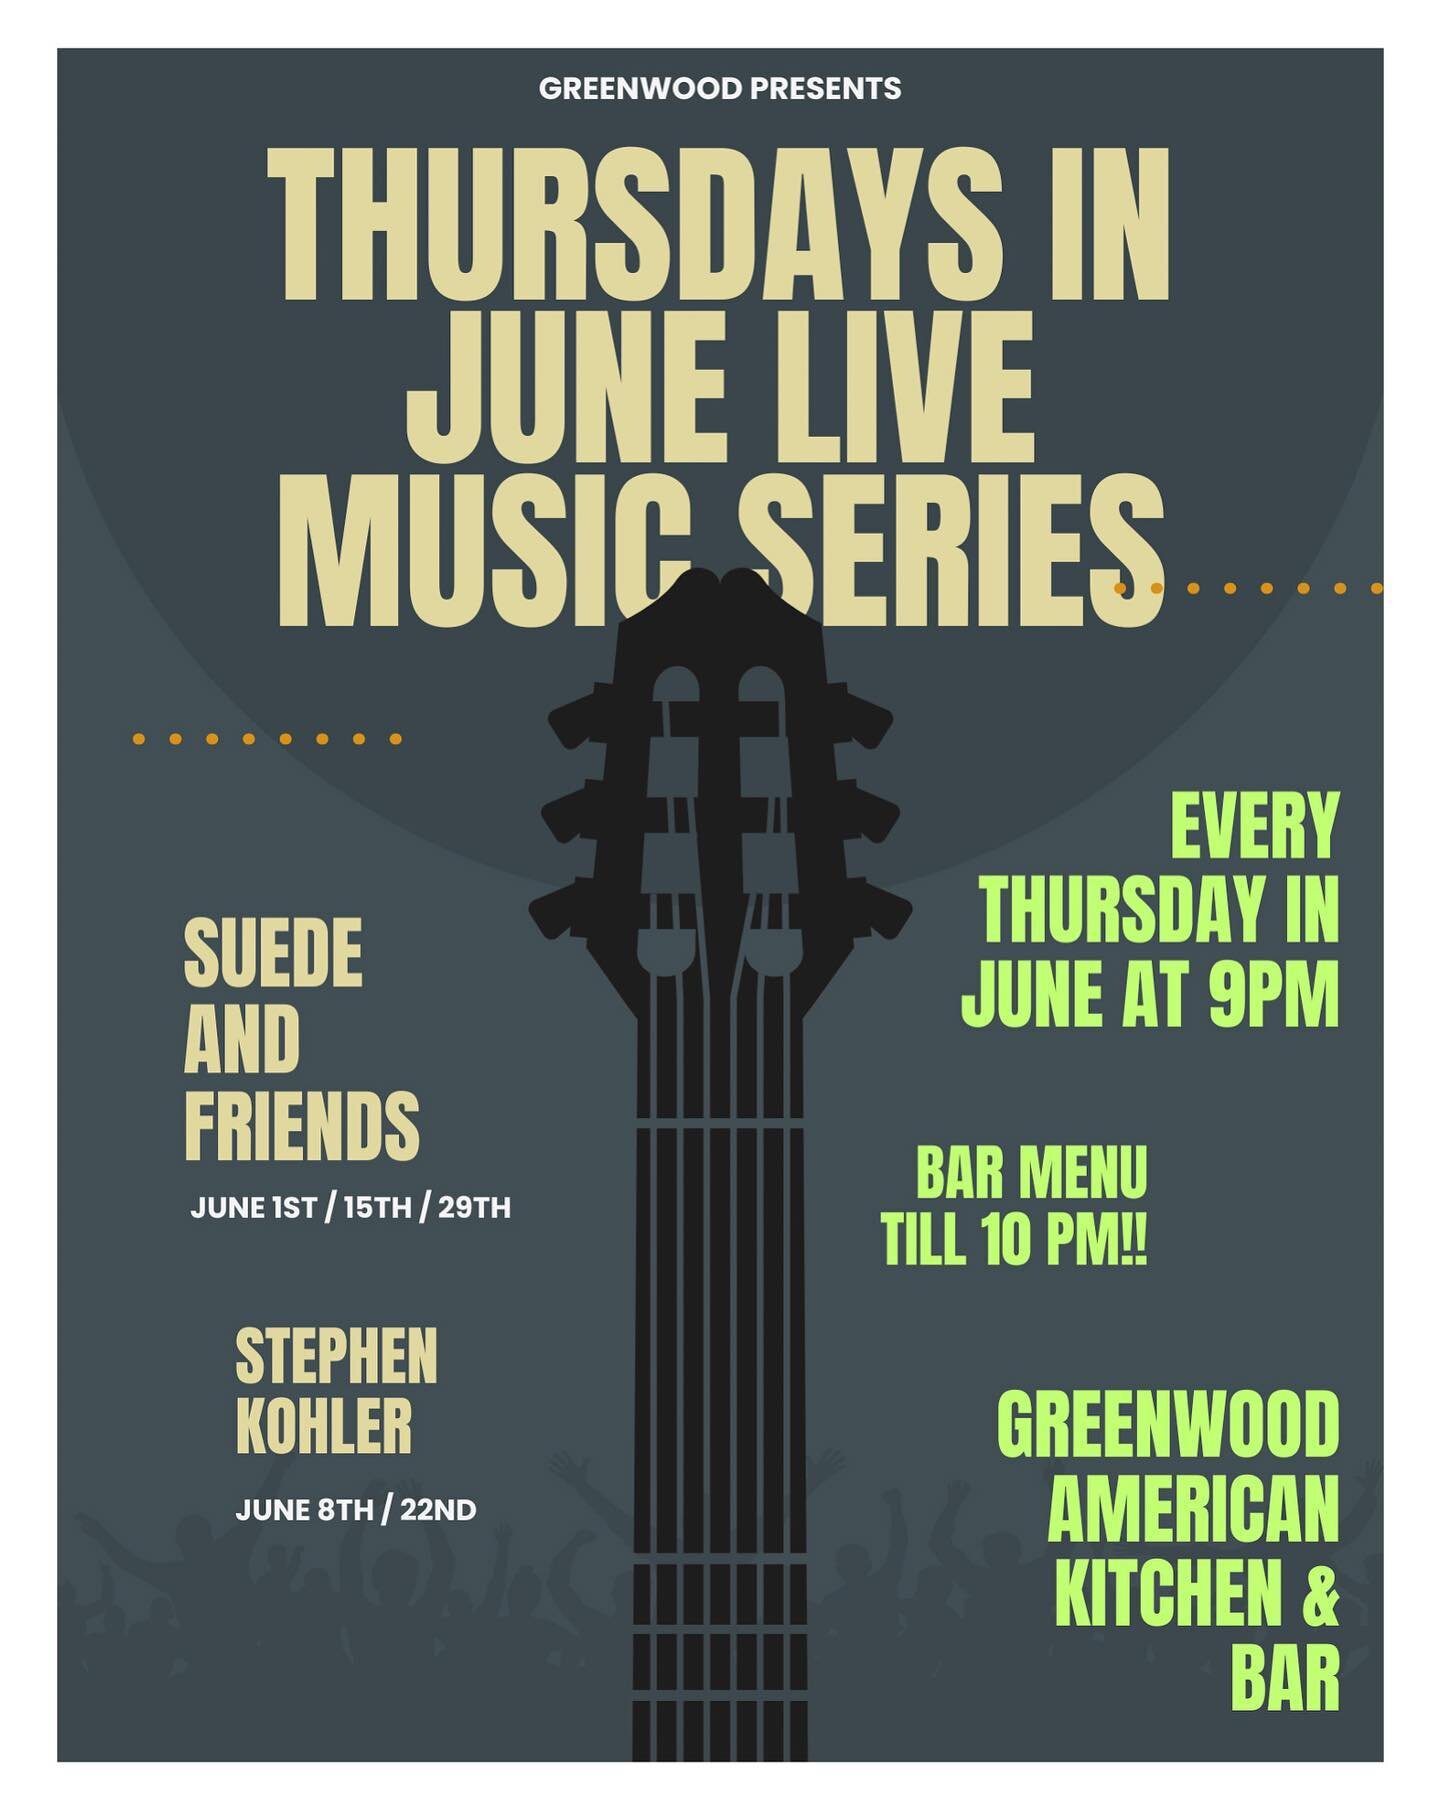 Join us on our east patio every Thursday in June as we spotlight a couple of fantastic local musicians!!